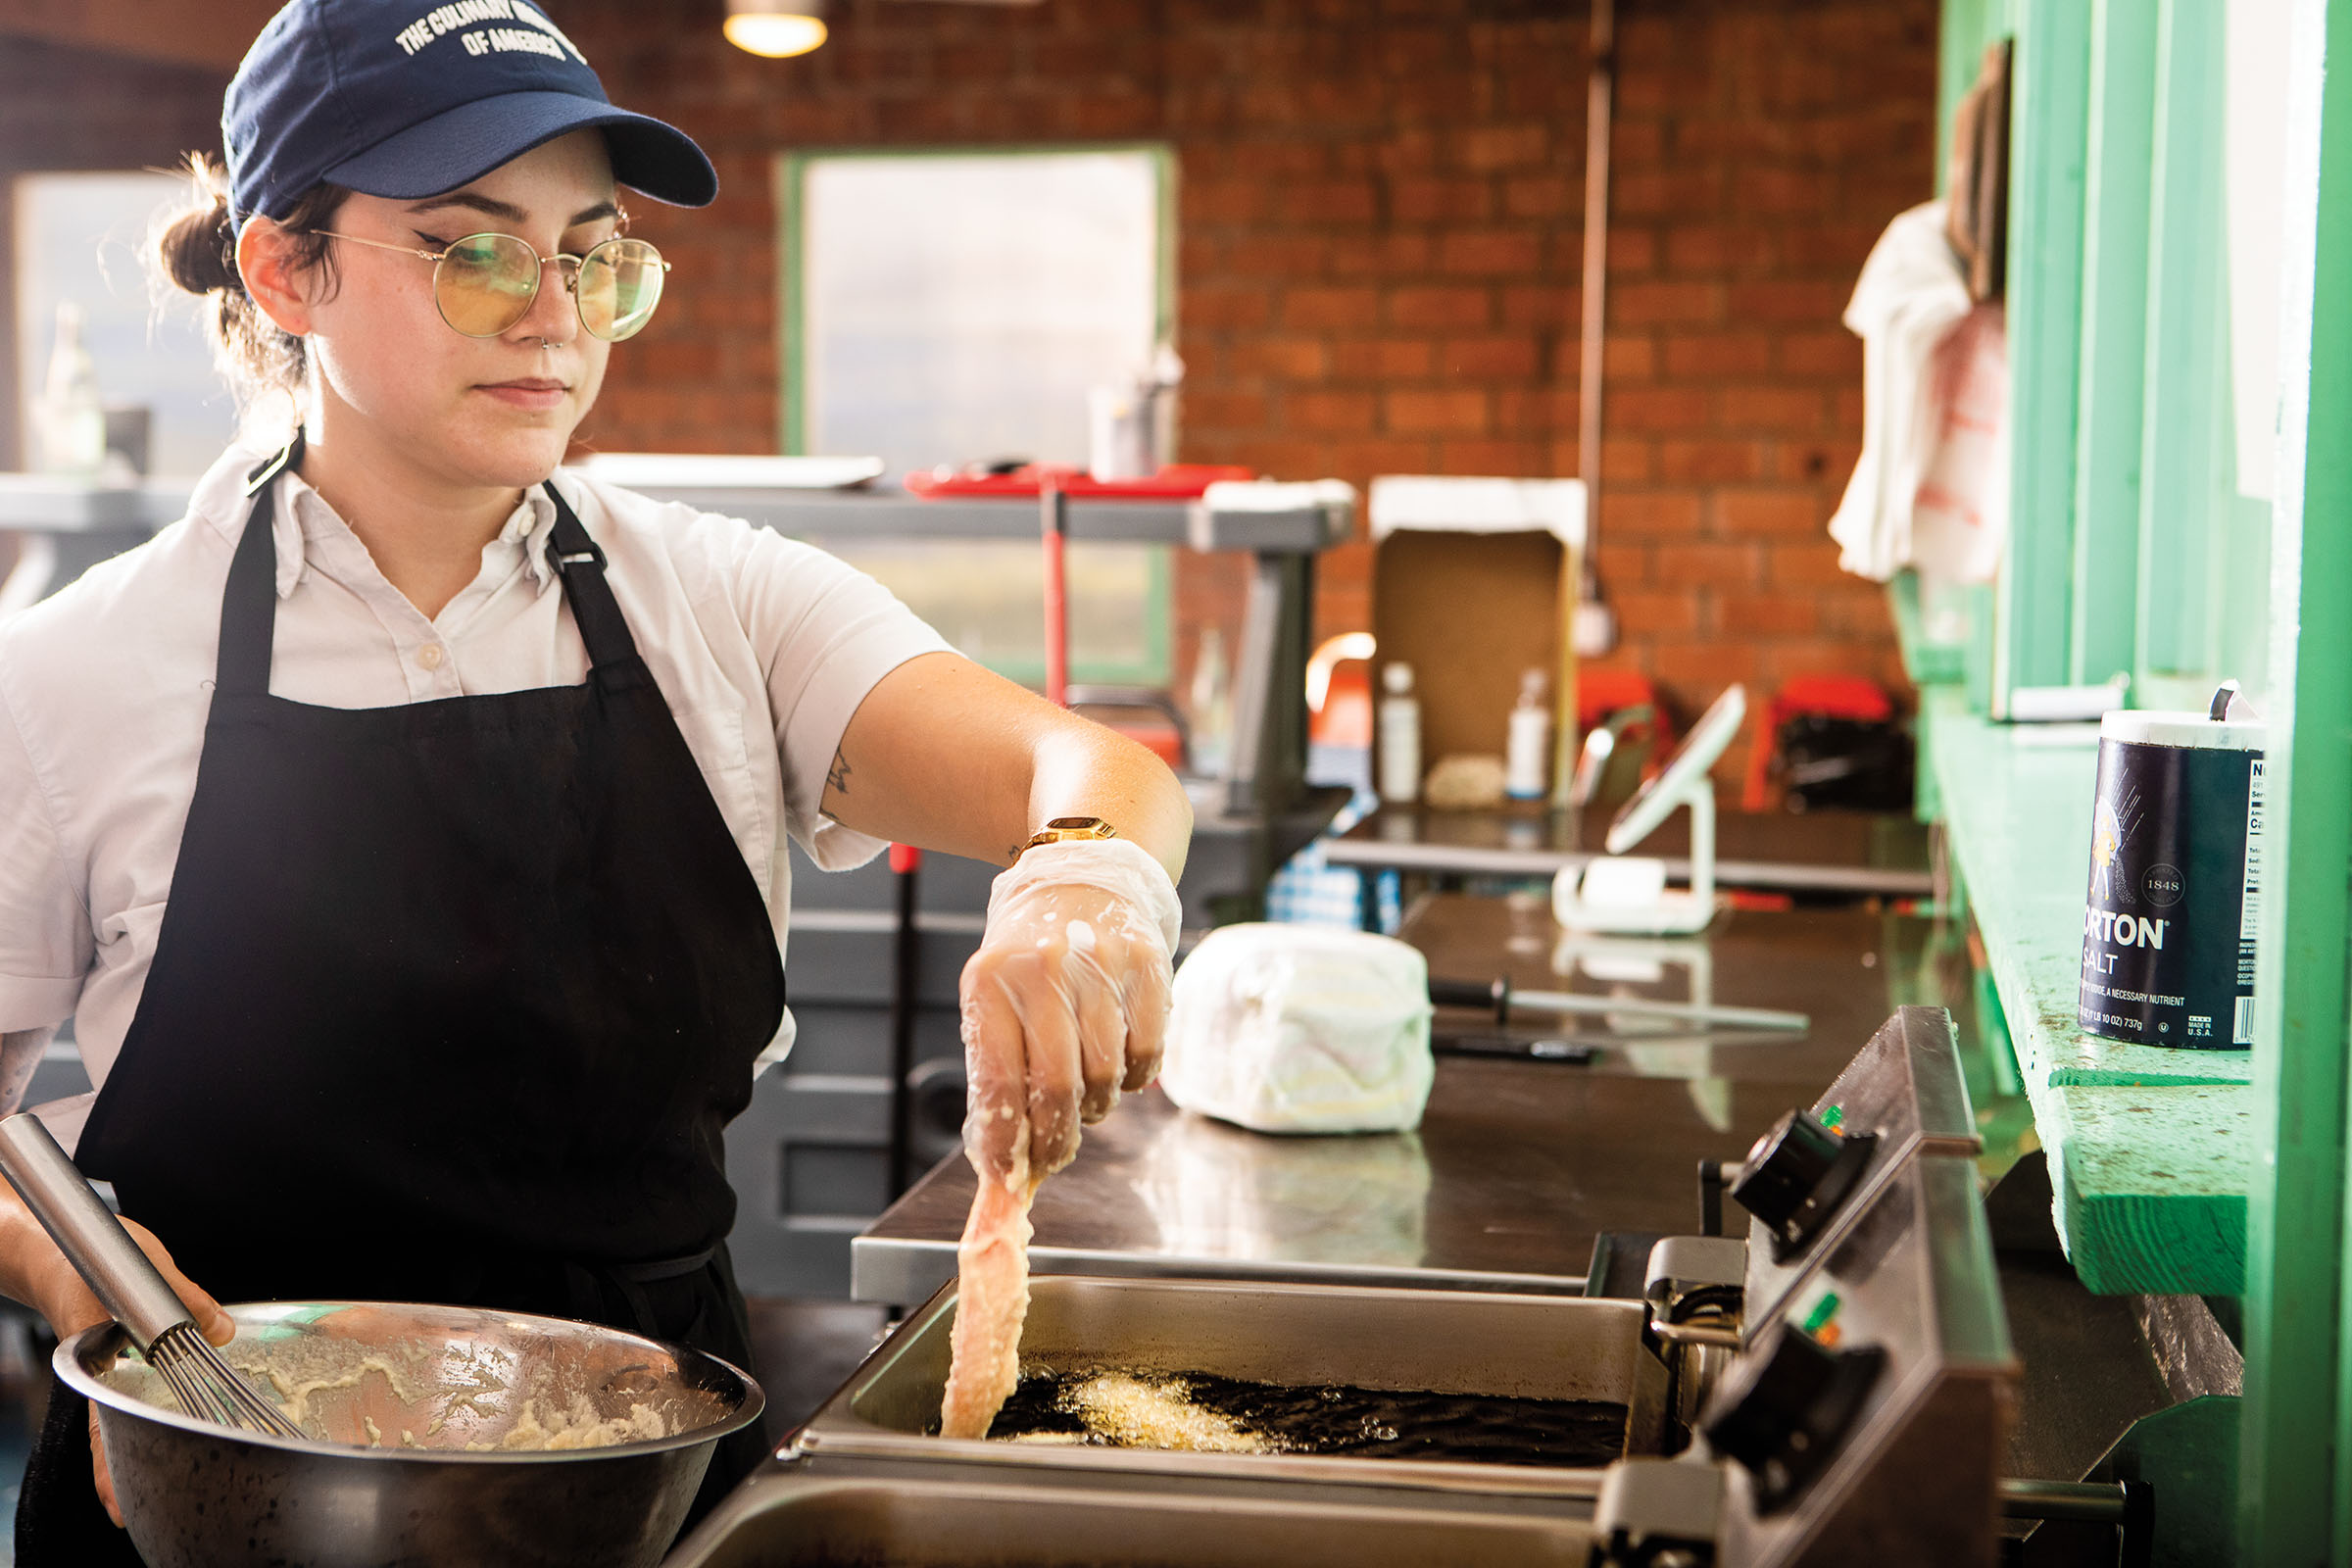 A woman in a blue baseball cap places fish fillets into a fryer